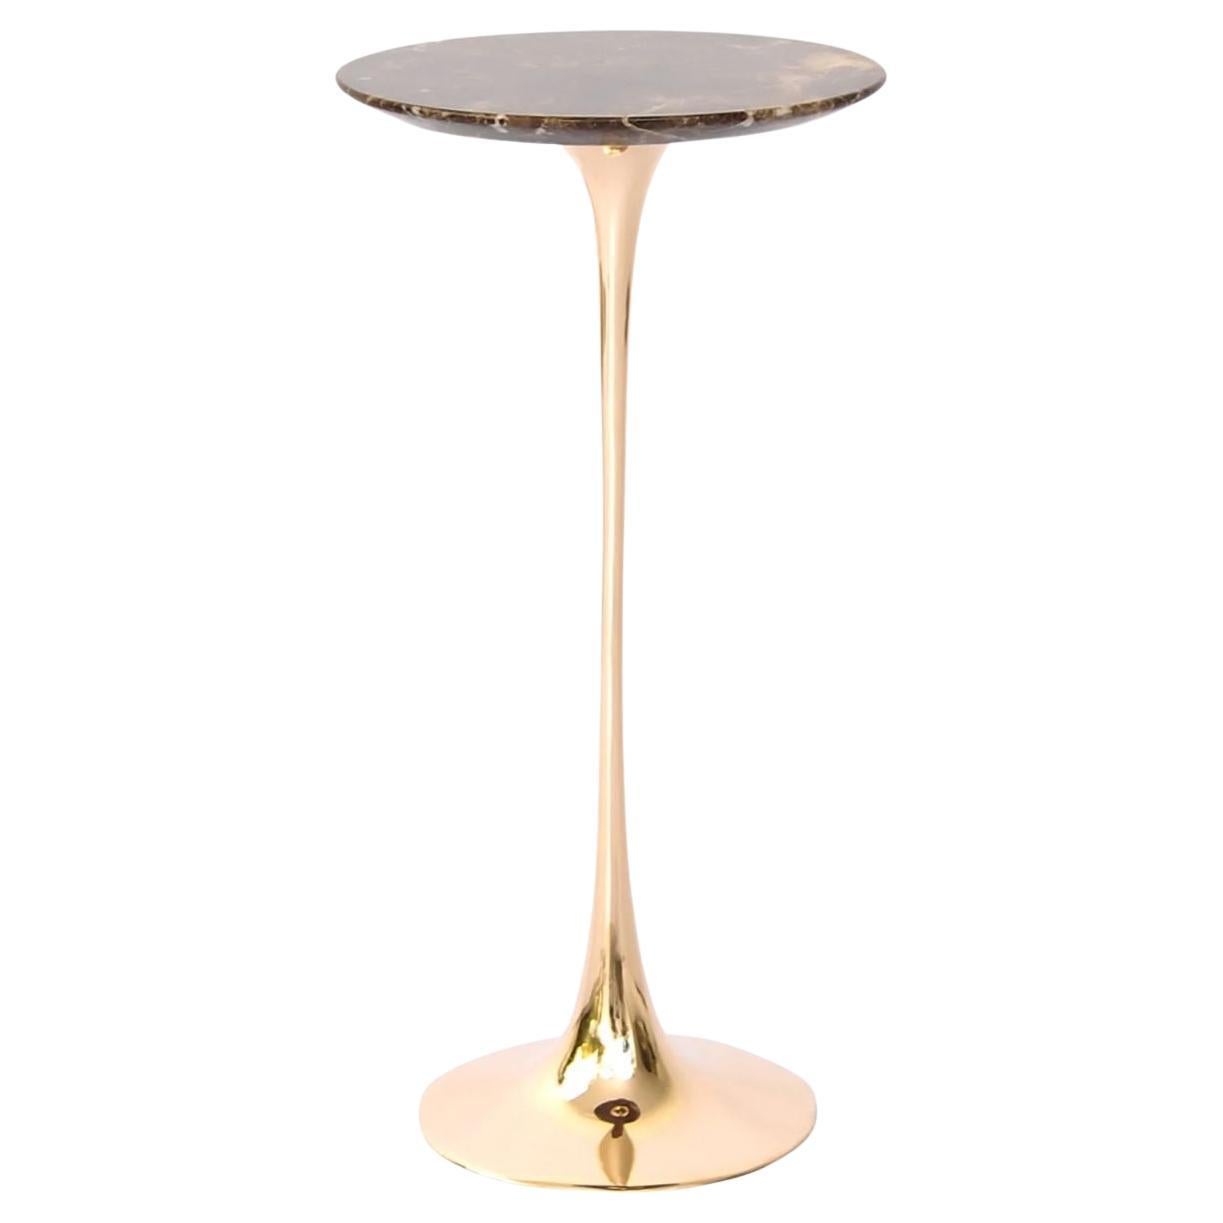 Apple Drink Table with Marrom Imperial Marble Top by Fakasaka Design